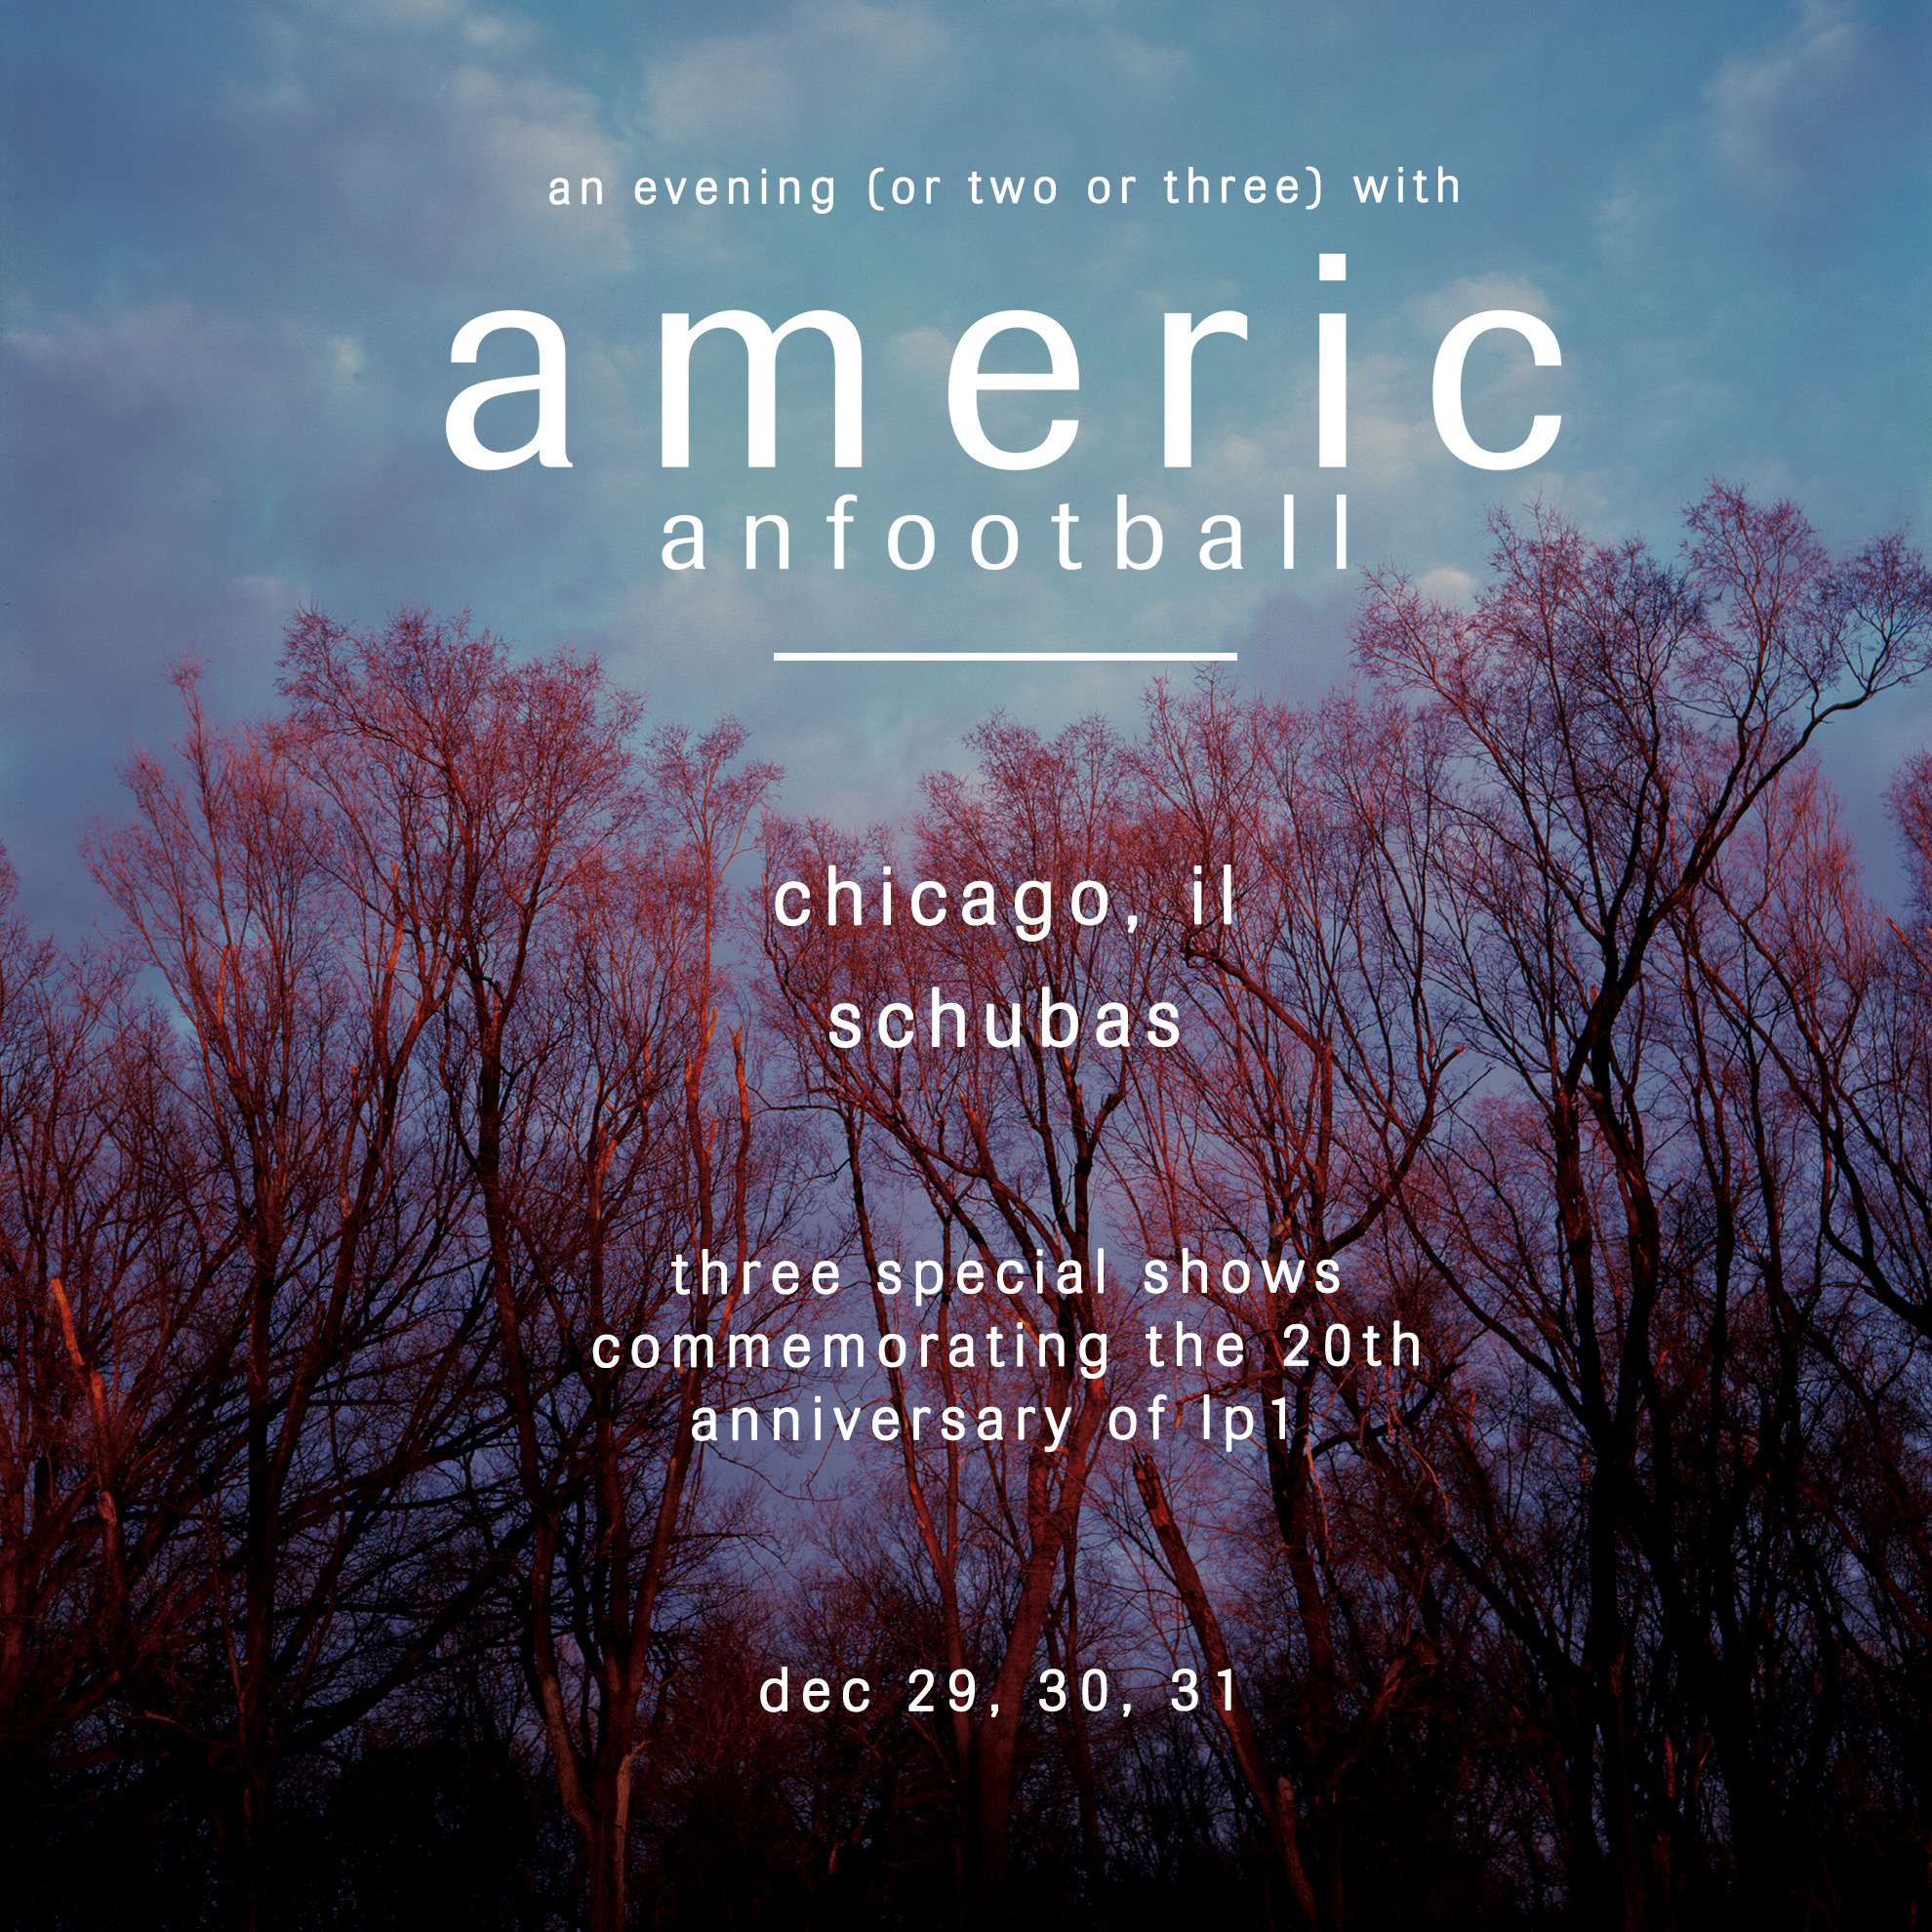 American Football Mark 20th Anniversary of Debut With New <i></noscript>Year One Demos</i> Compilation” title=”AmericanFootballSchubasAdmat-1568471929″ data-original-id=”343219″ data-adjusted-id=”343219″ class=”sm_size_full_width sm_alignment_center ” data-image-use=”multiple_use” /><br />
<strong>American Football Tour Dates:</strong><br />
09/13 – Kansas City, MO @ Granada Theatre<br />
09/14 – St. Louis, MO @ Delmar Hall<br />
09/15 – Chicago, IL @ Riot Fest<br />
11/02 – Camden, London, UK @ Mirrors Festival<br />
11/03 – Leeds, UK @ Brudenell<br />
11/04 – Manchester, UK @ Gorilla<br />
12/29-31 – Chicago, IL @ Schubas Tavern</p>
</p> </div>
</div>
</div>
</div>
</div>
</section>
<section data-particle_enable=